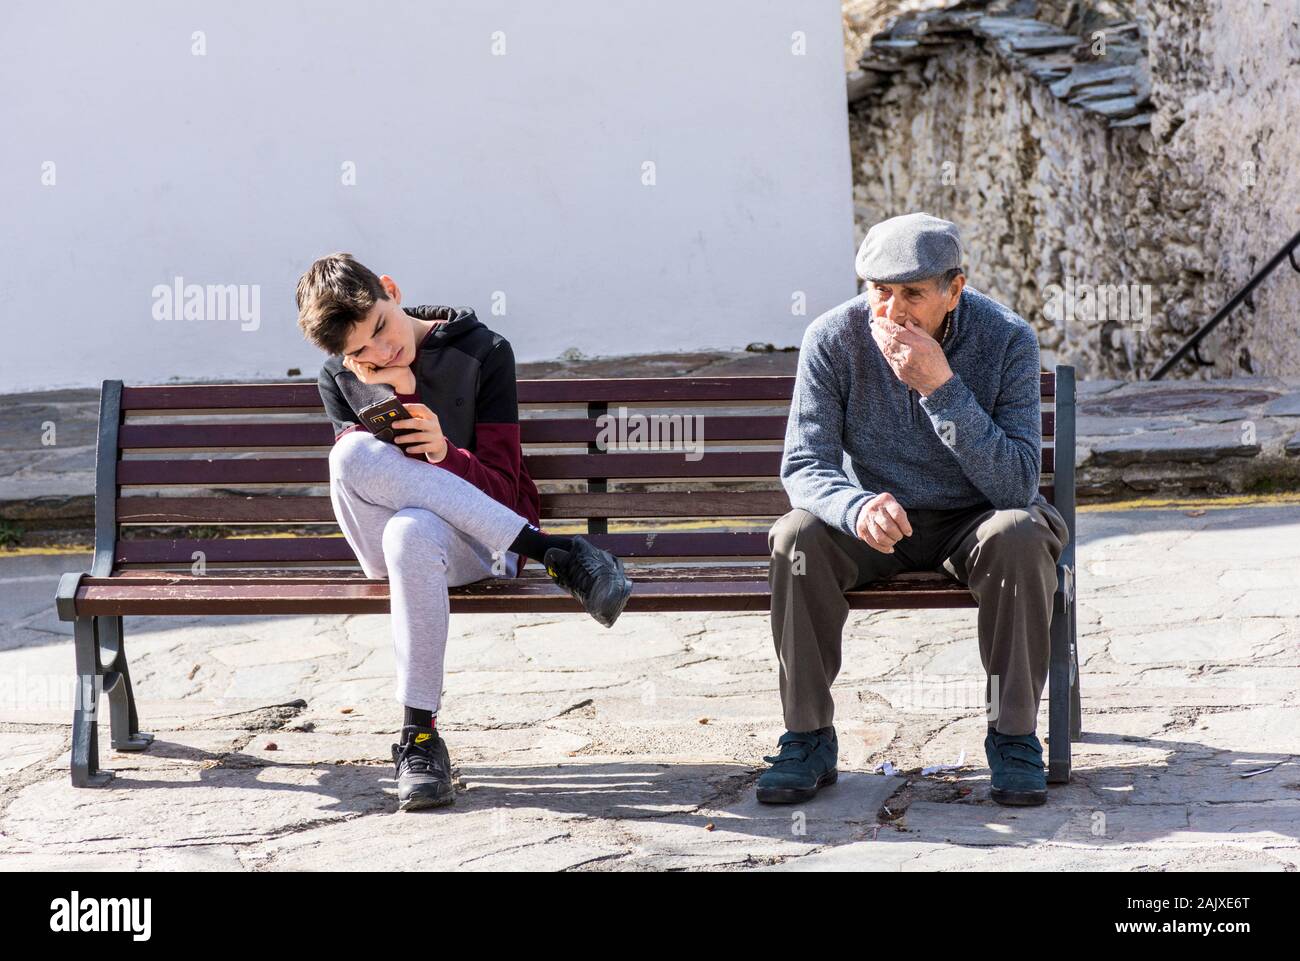 Capileira, La Alpujarra, Alpujarras, Granada region, Andalusia, Spain. A youth plays on his mobile phone sitting next to a senior man in the village s Stock Photo